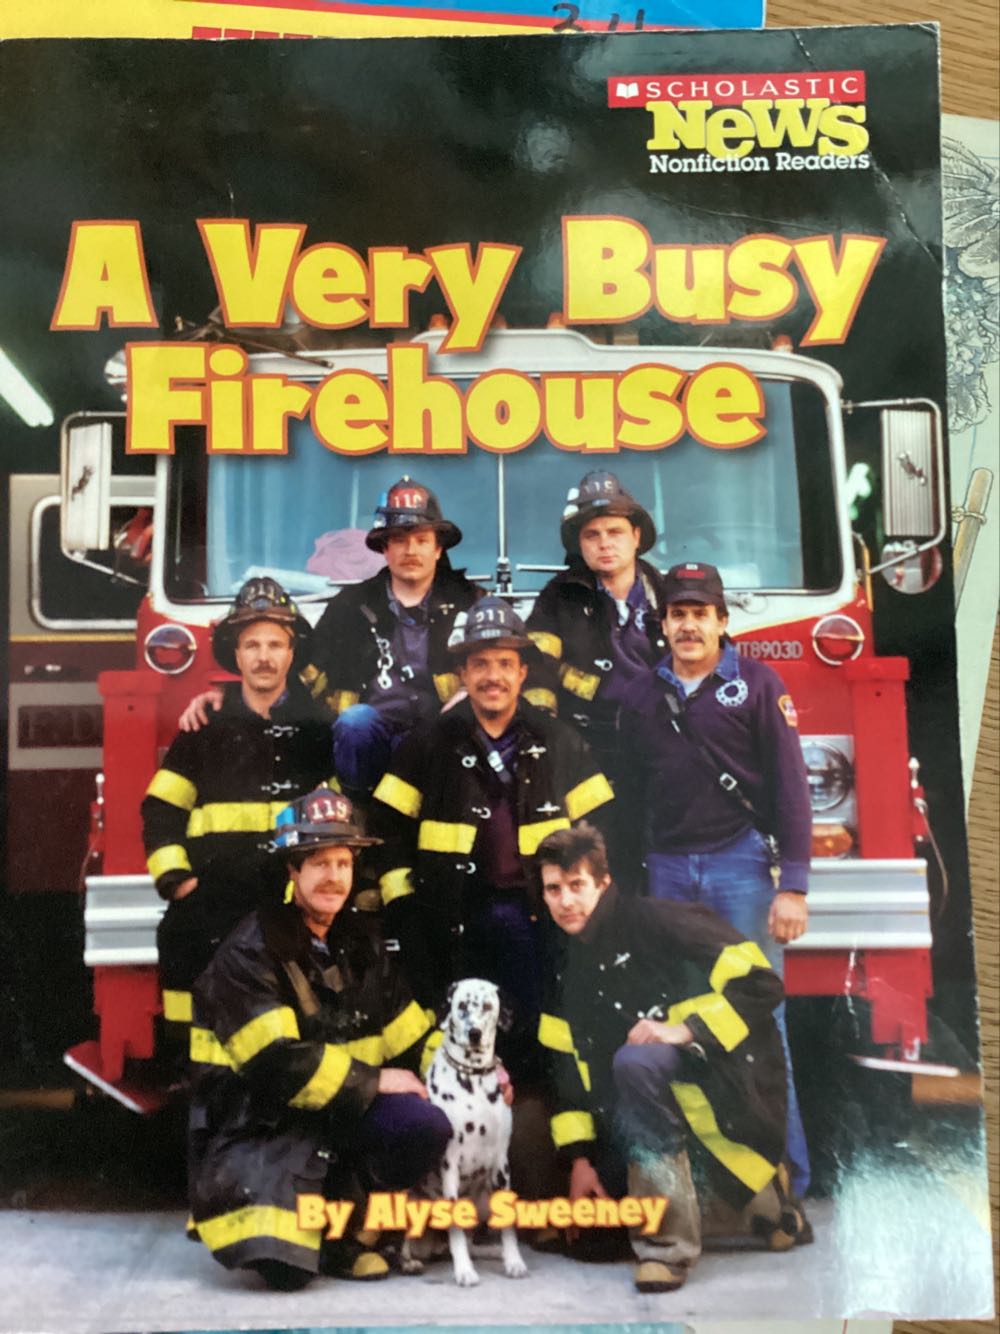 A Very Busy Firehouse - Alyse Sweeney book collectible [Barcode 9780545020367] - Main Image 1